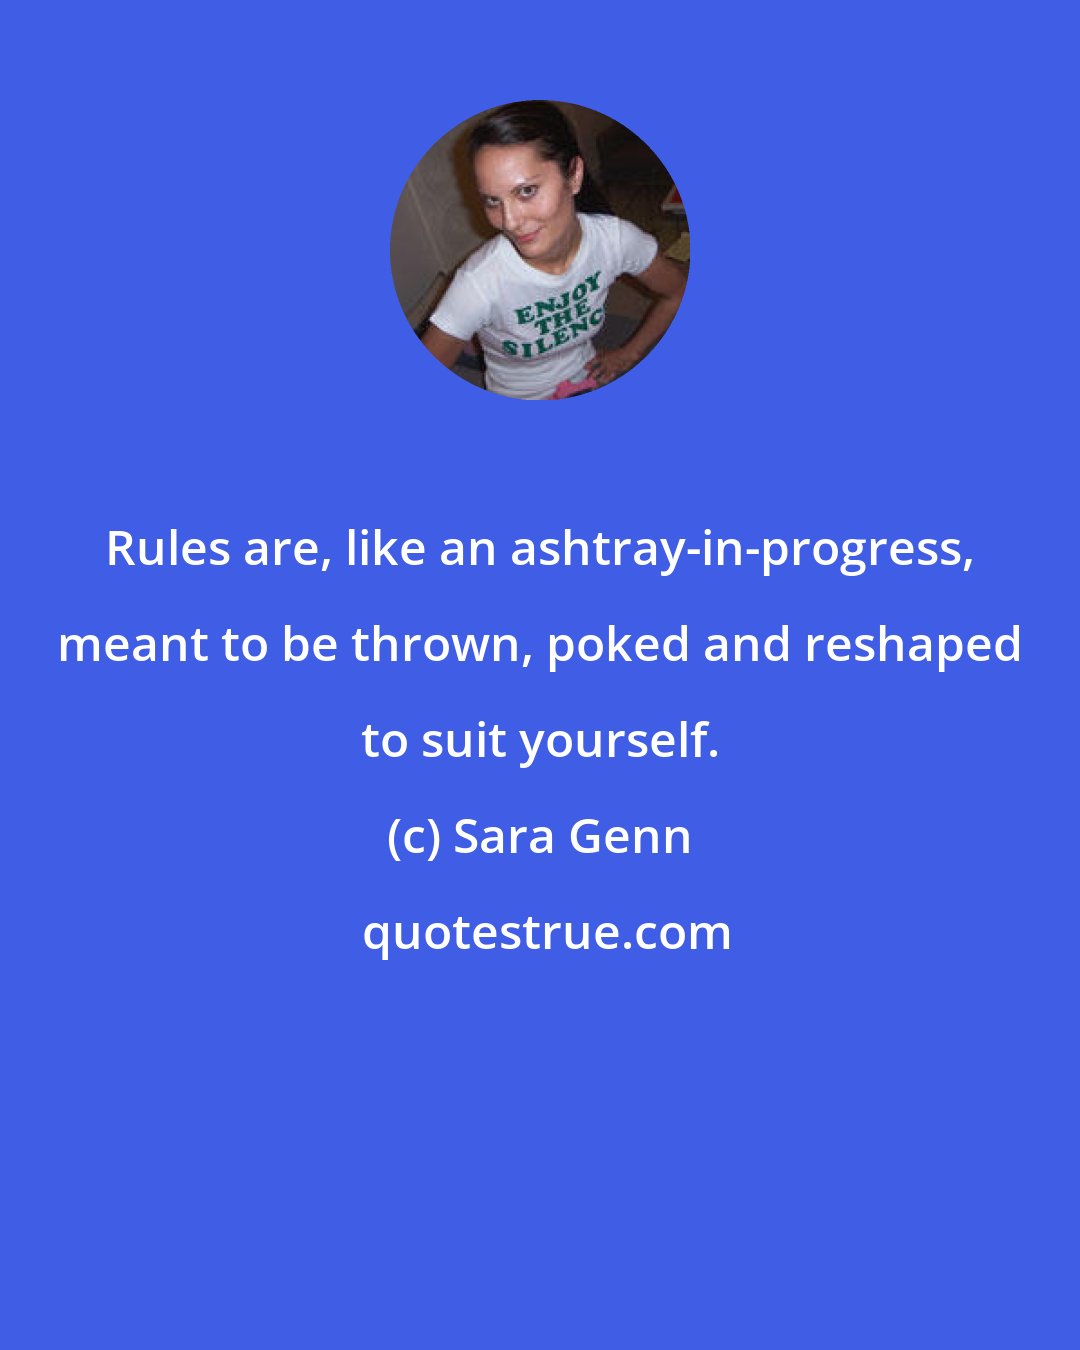 Sara Genn: Rules are, like an ashtray-in-progress, meant to be thrown, poked and reshaped to suit yourself.